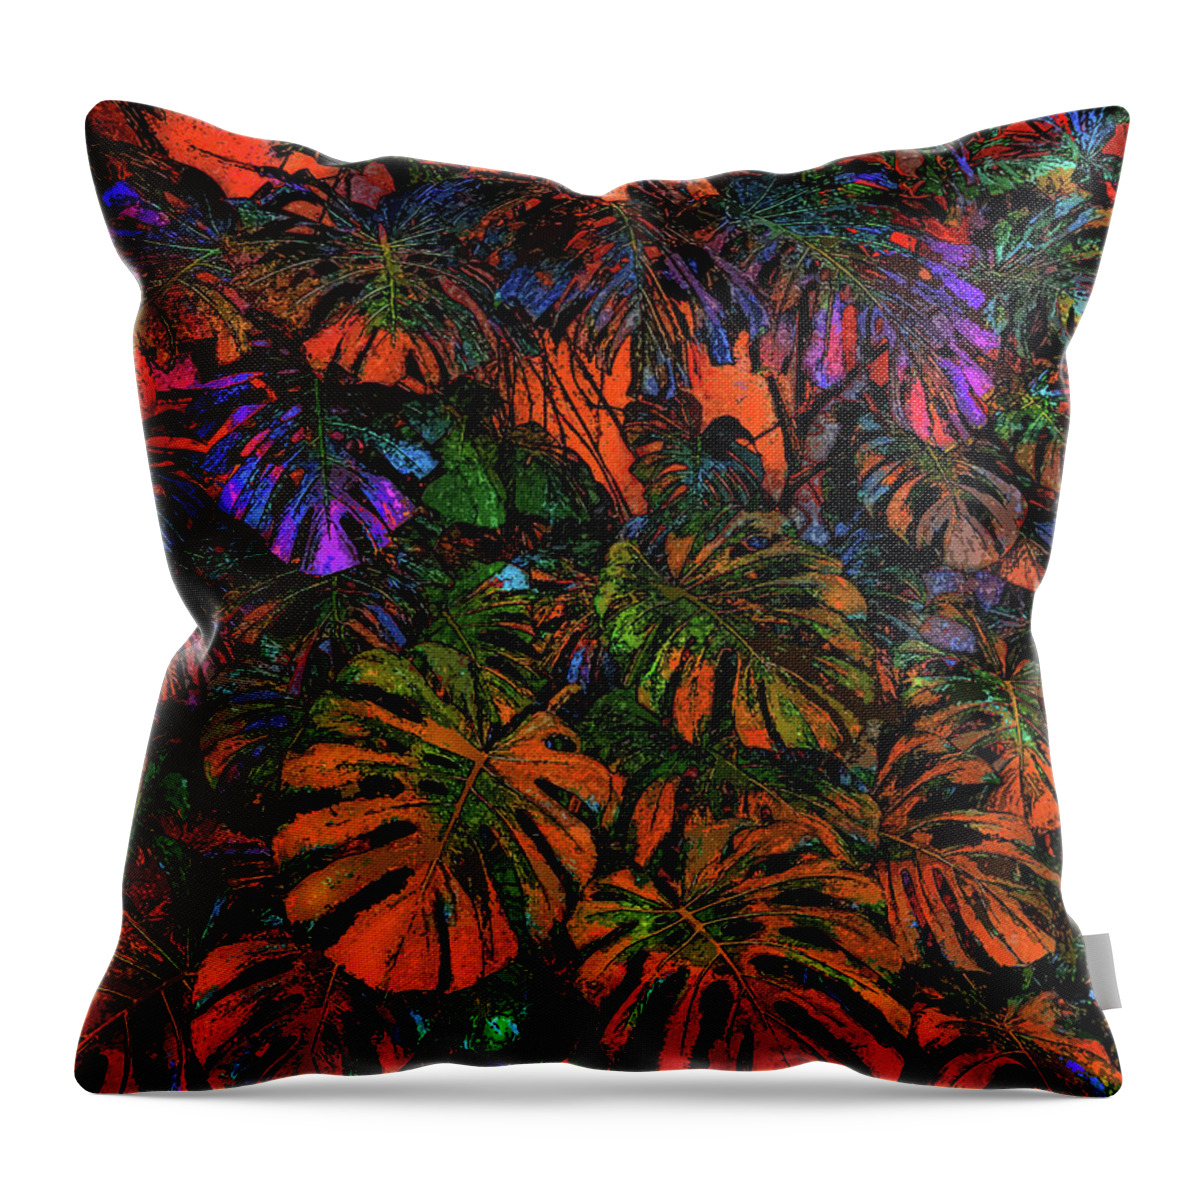 Digital Art Andy I Za Throw Pillow featuring the digital art Monstera by Andy i Za